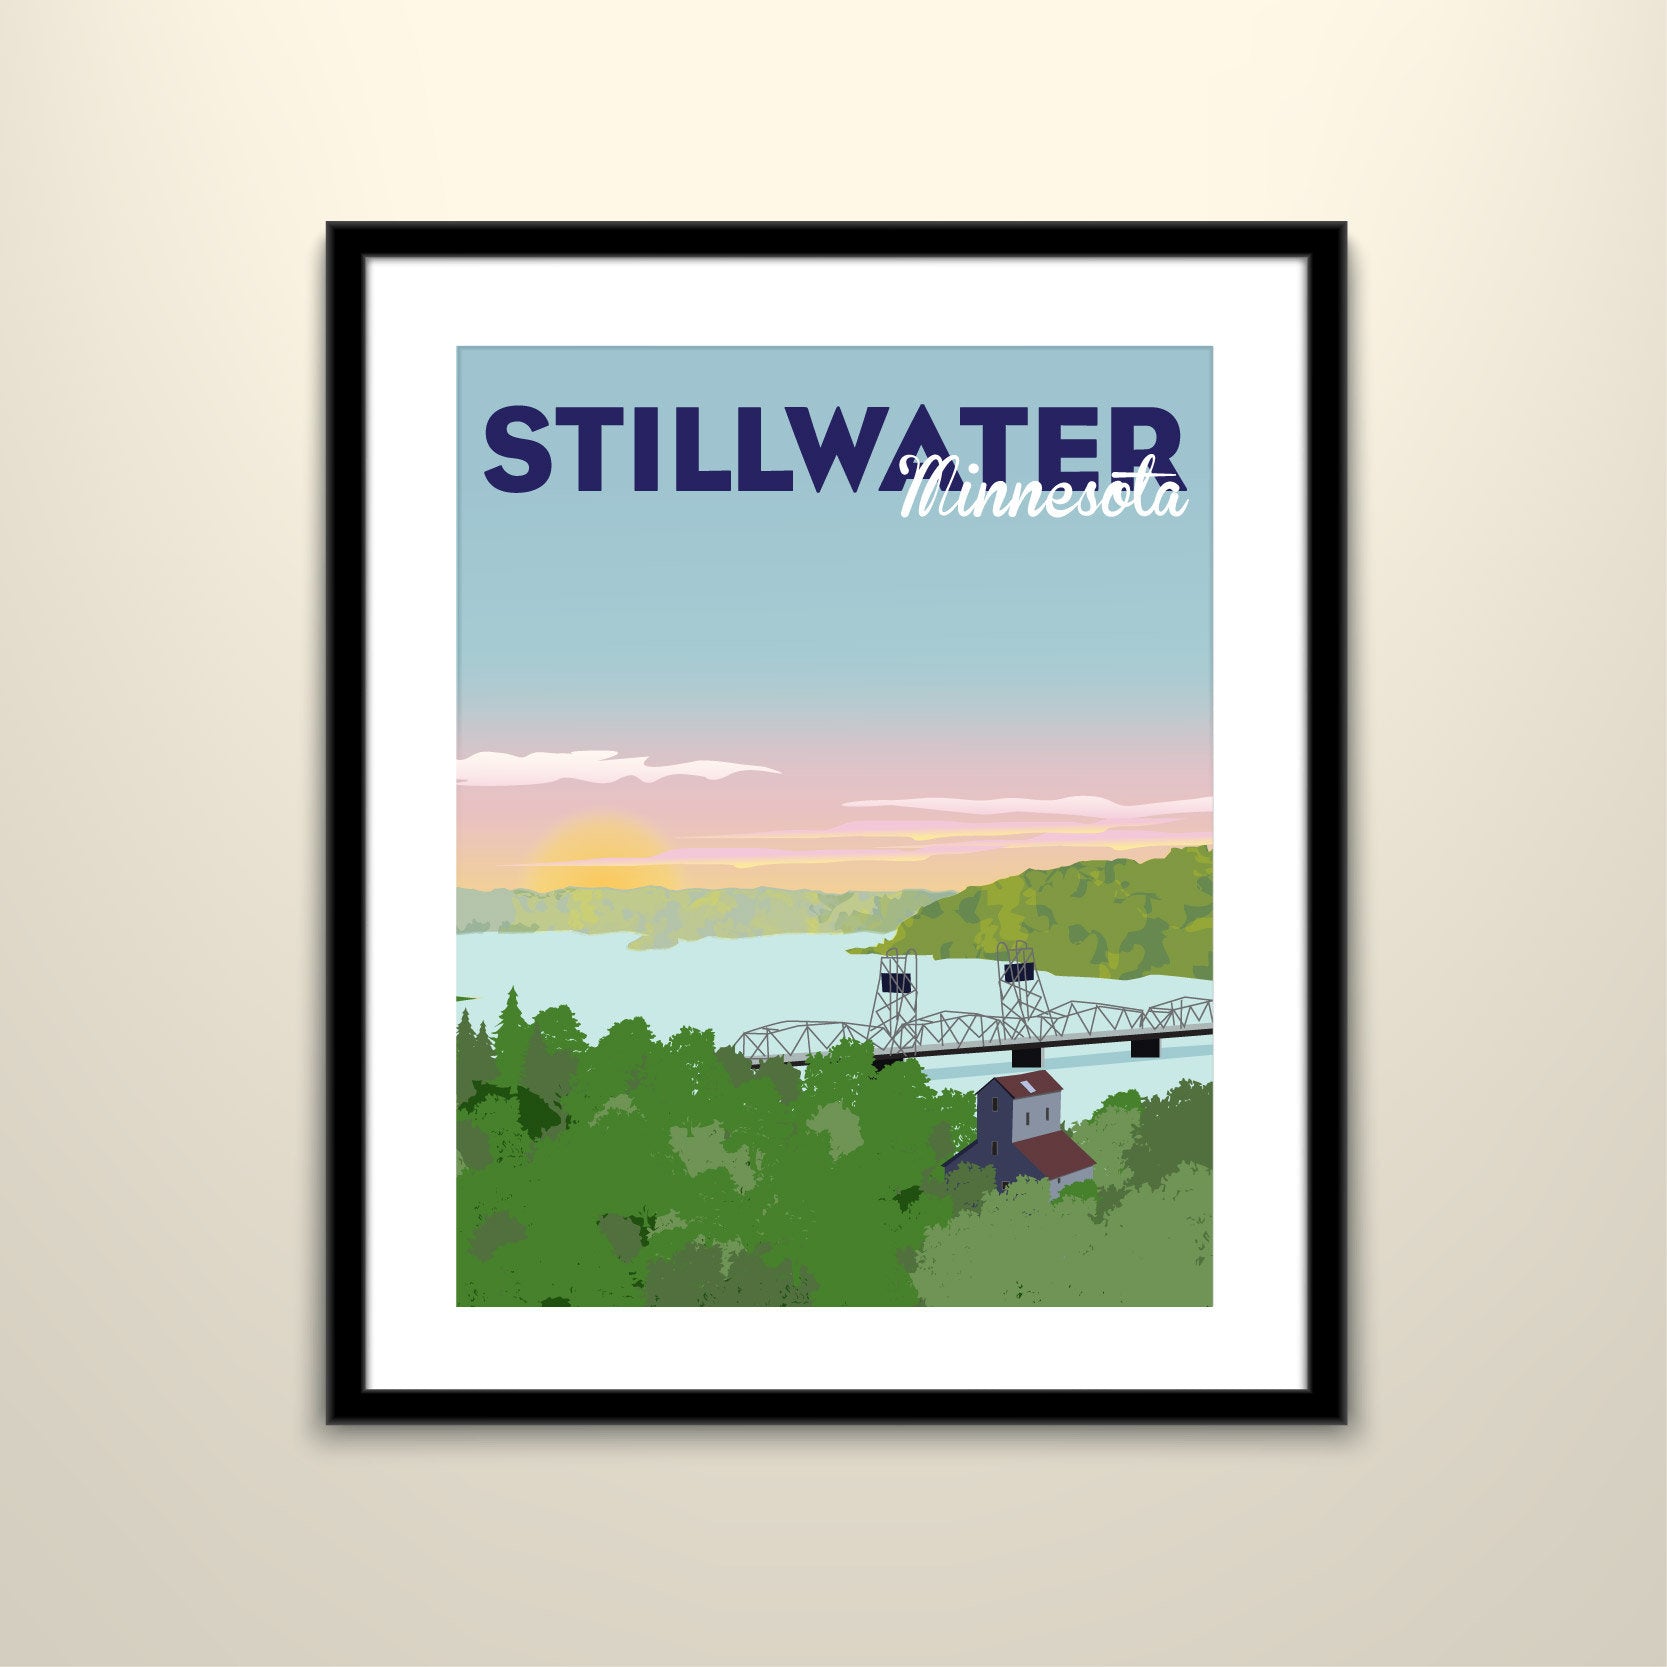 Stillwater Minnesota Travel 11x14 Paper Poster - Wedding Poster personalized with Names and date (frame not included)